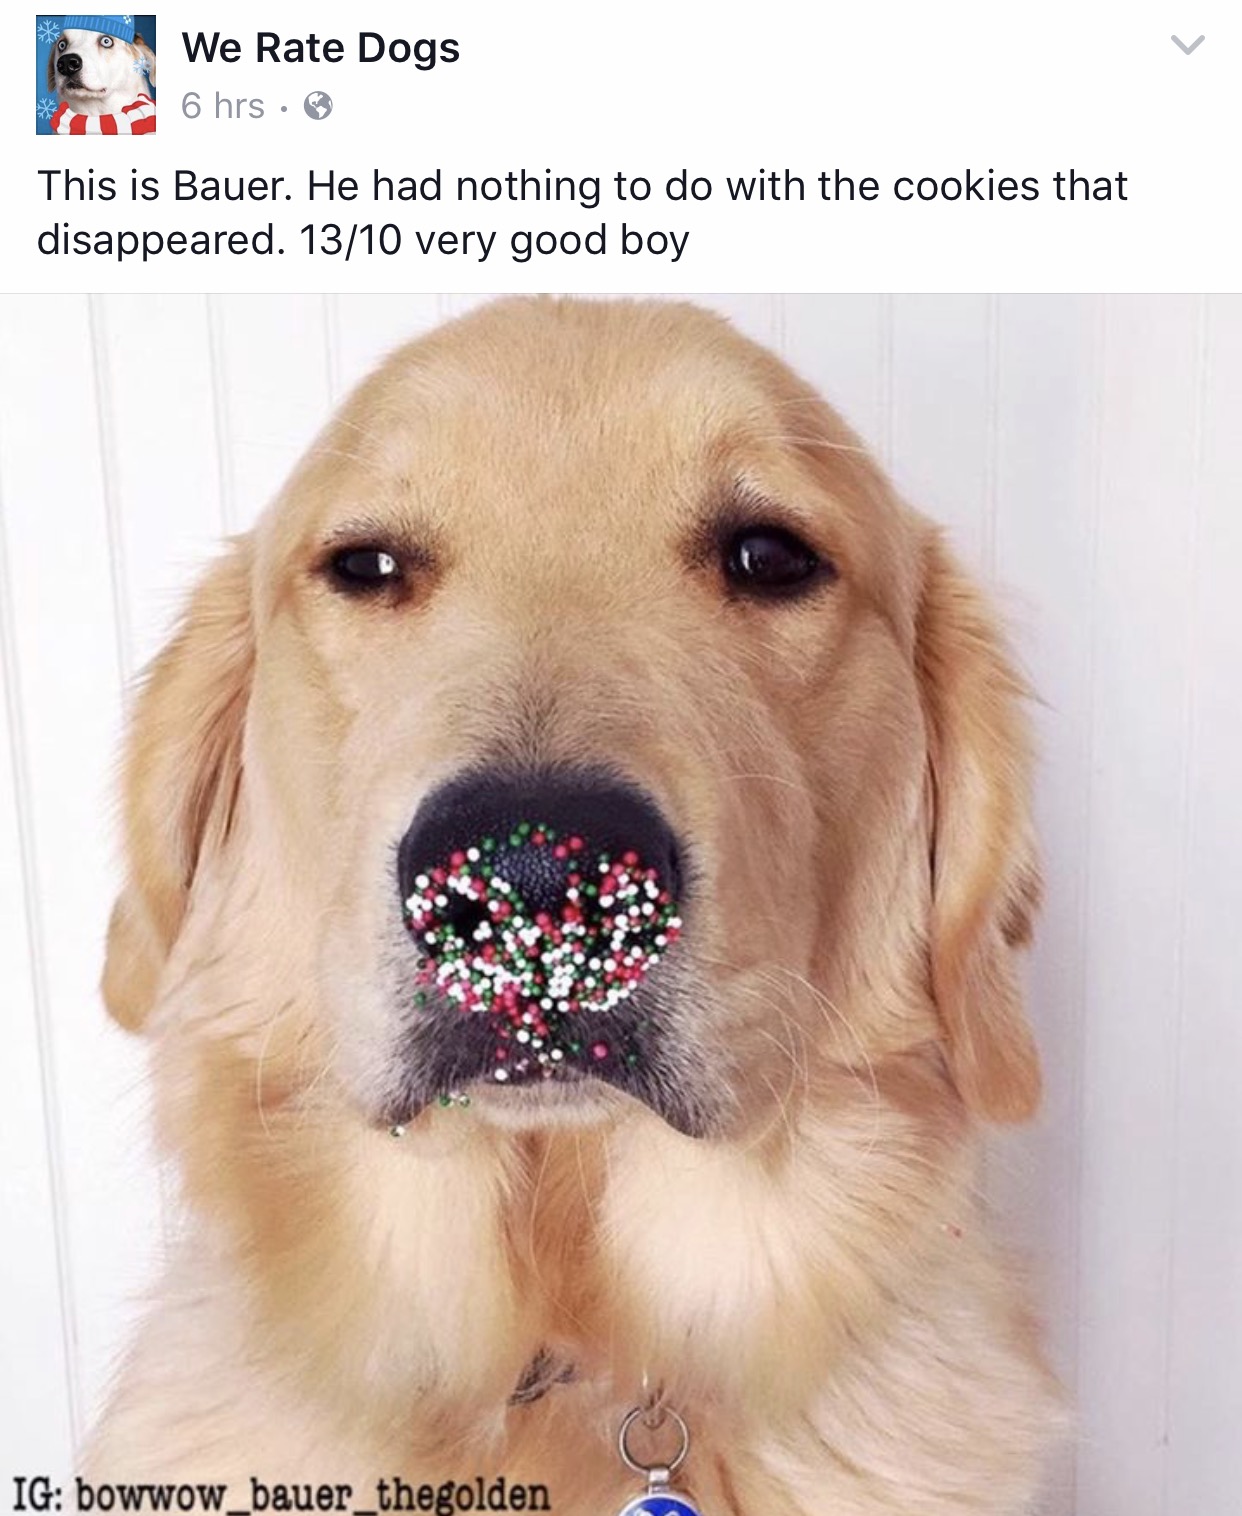 dog sprinkle nose - We Rate Dogs 6 hrs This is Bauer. He had nothing to do with the cookies that disappeared. 1310 very good boy Ig bowwow_bauer_thegolden